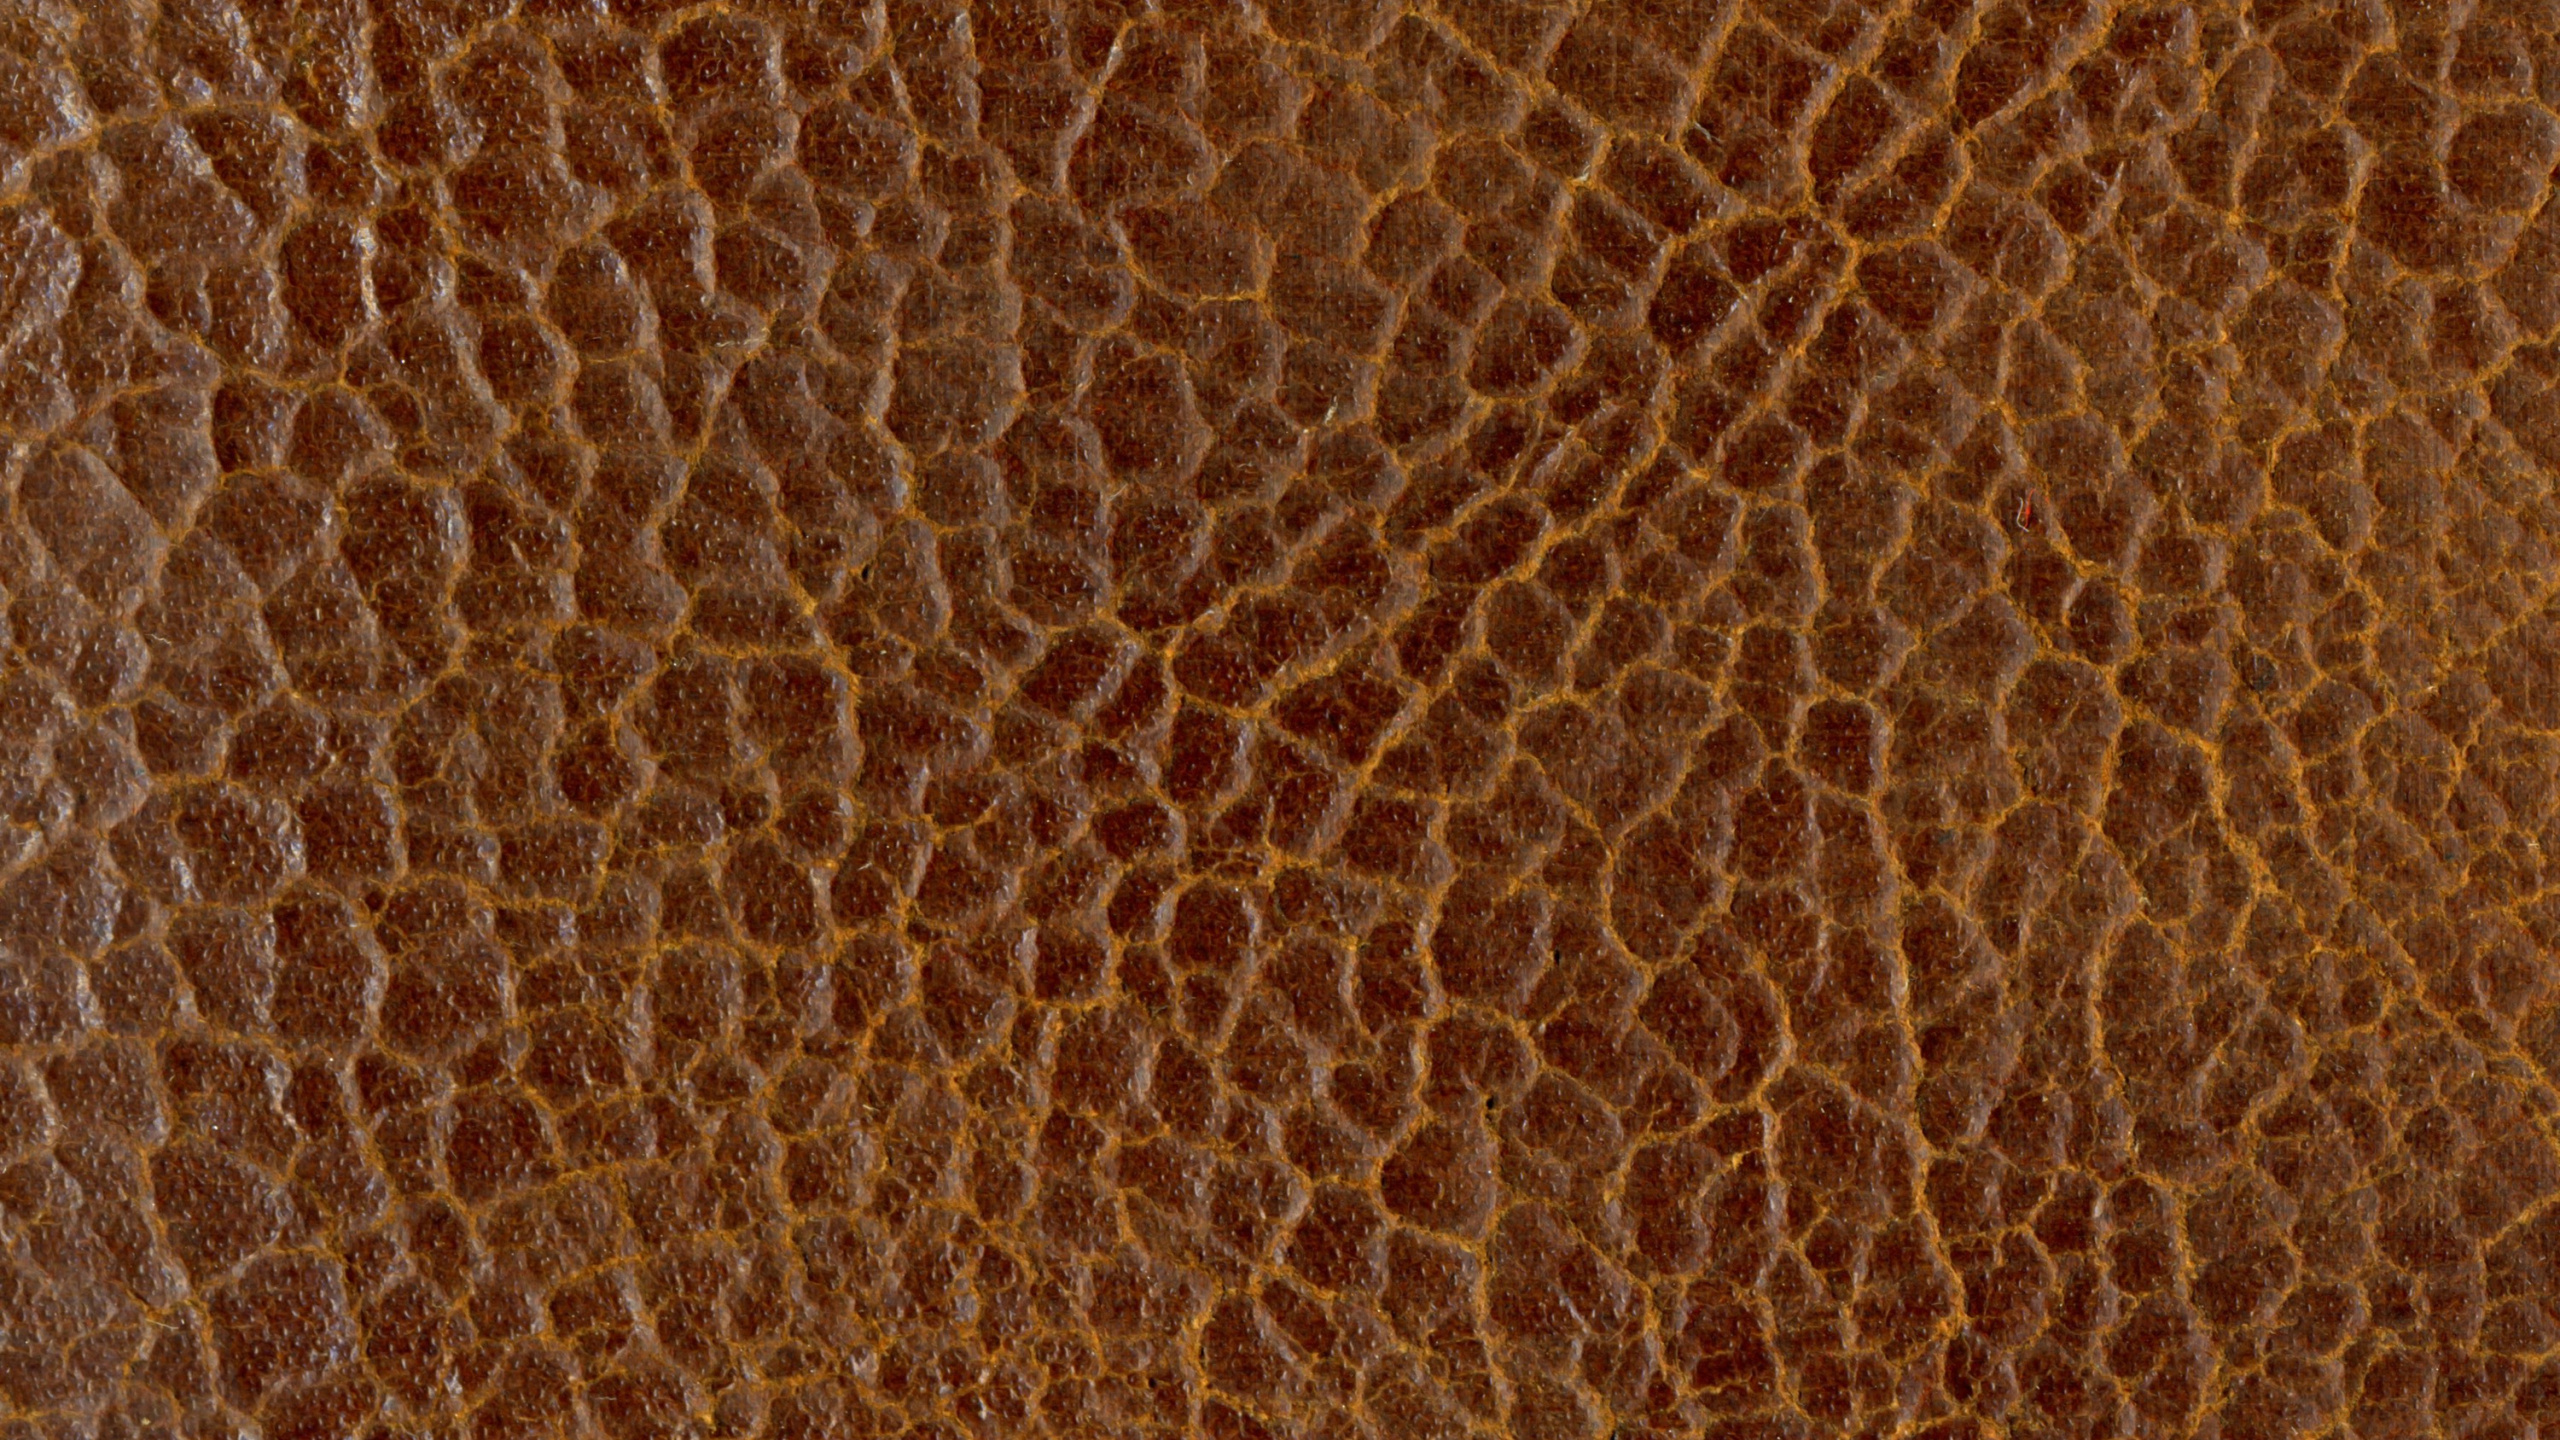 Brown and White Leopard Textile. Wallpaper in 2560x1440 Resolution